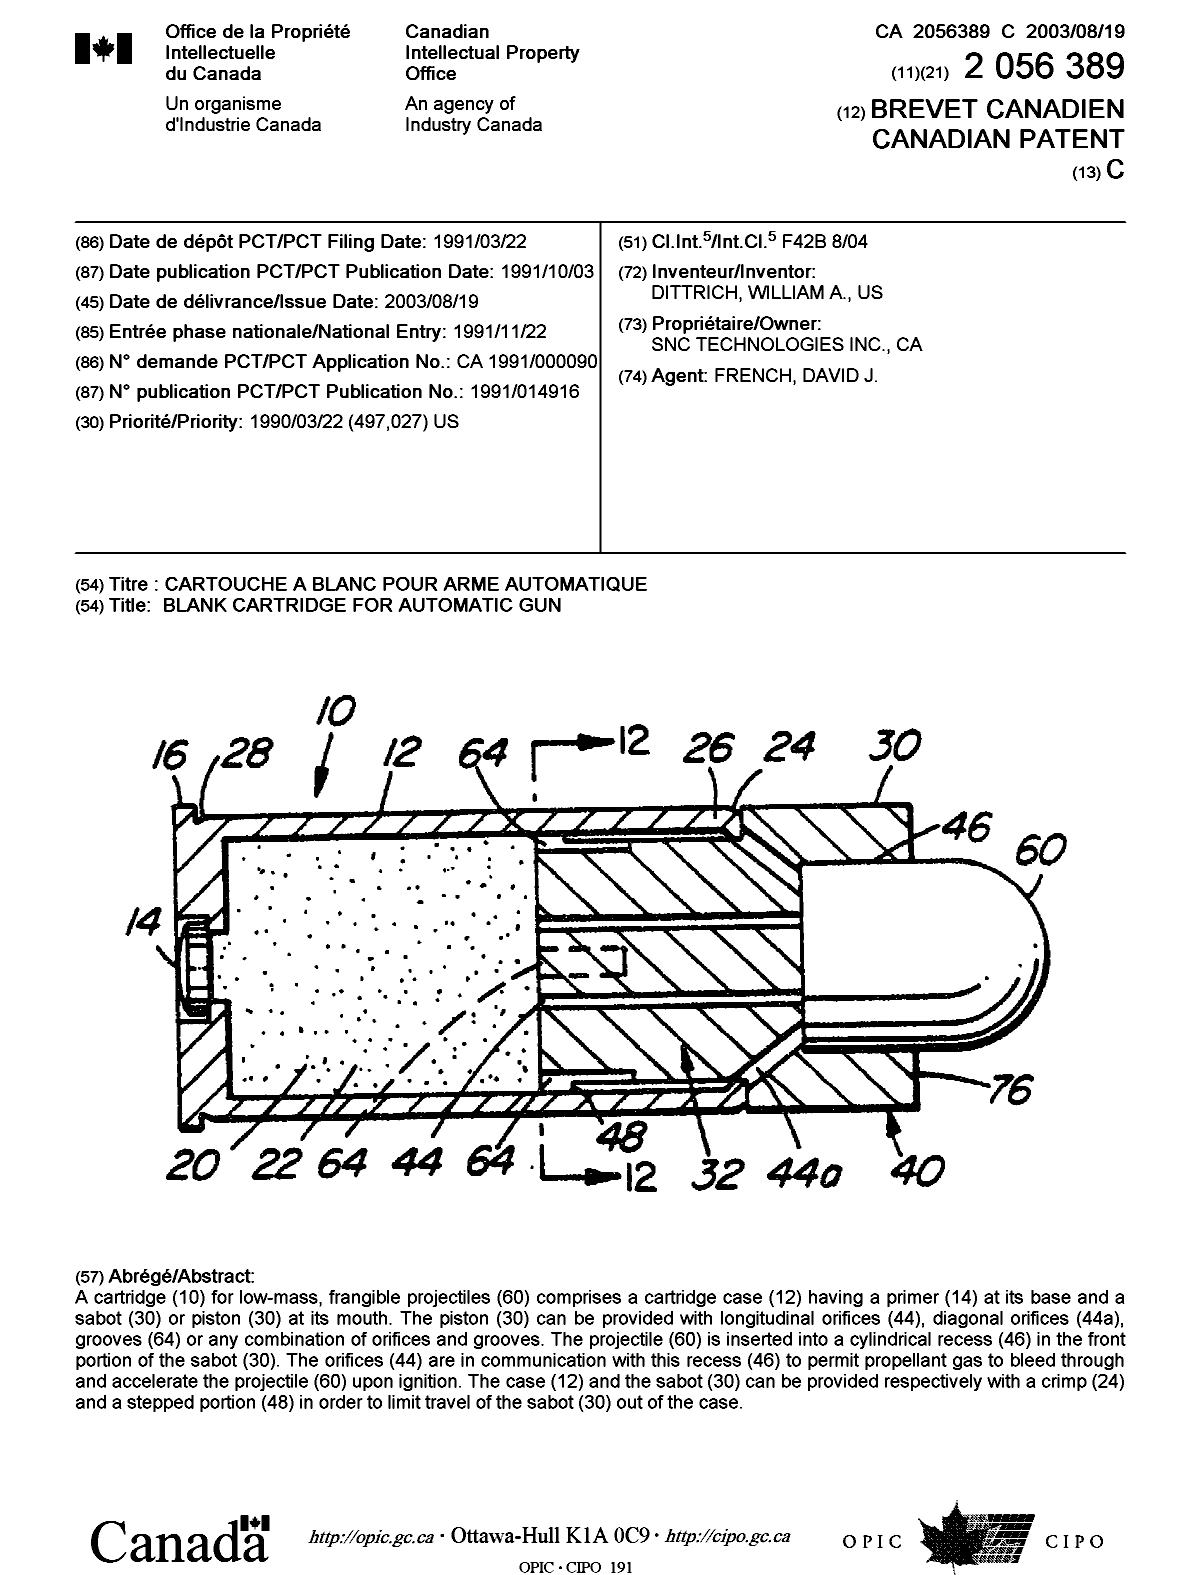 Canadian Patent Document 2056389. Cover Page 20030716. Image 1 of 1